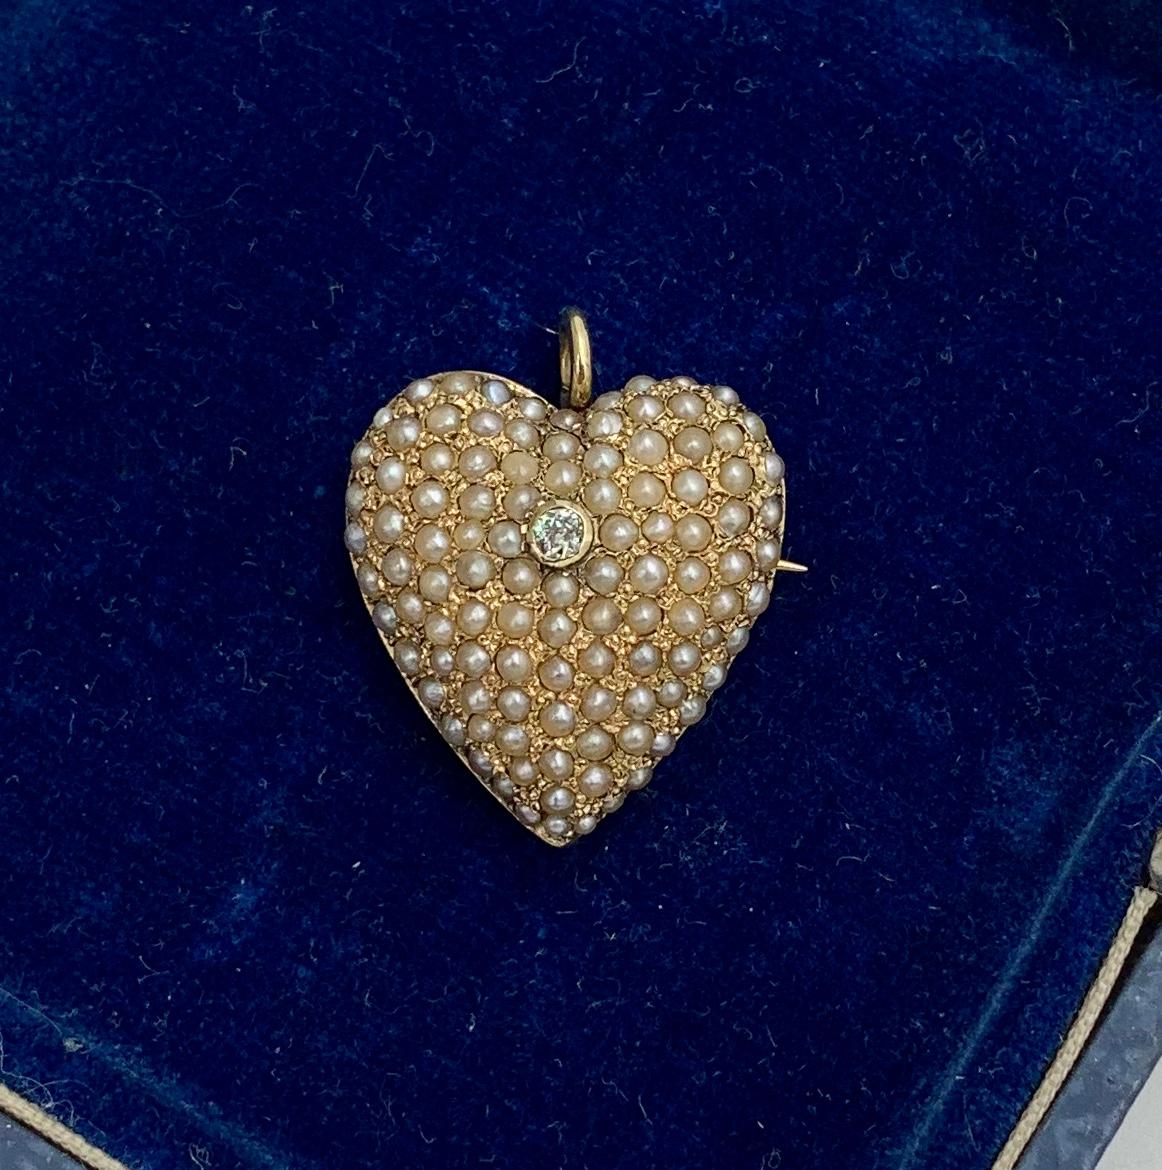 This is an Antique Victorian Diamond Heart Pendant set throughout with lovely Seed Pearls.  In the center is a sparkling Old Mine Cut Diamond.  The diamond and pearls are set in a wonderful 14 Karat Gold Heart.  The Heart has a swivel bale which can